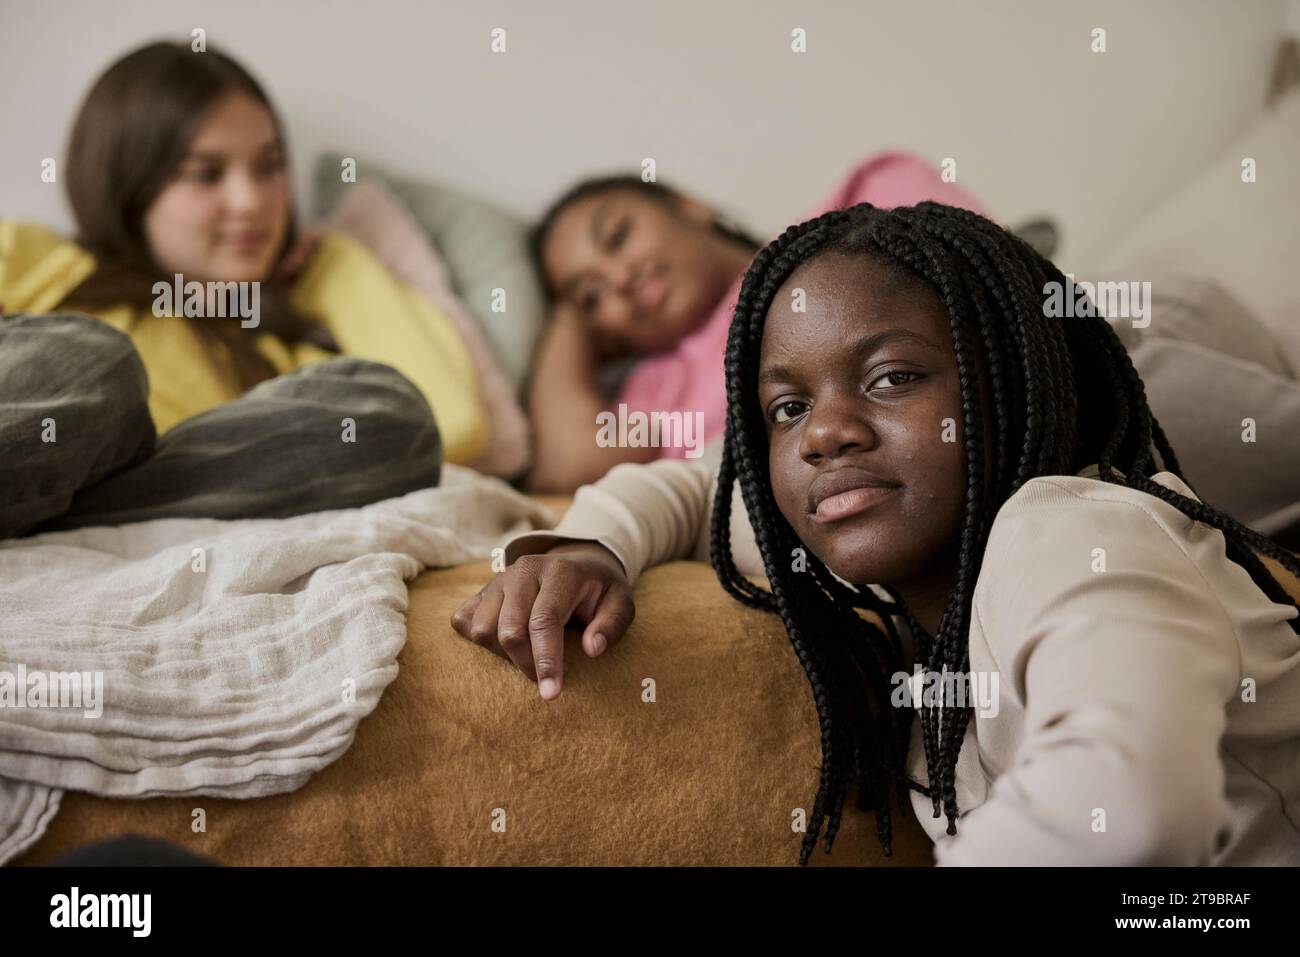 Teenage girl with braided hair by female friends lying on bed in background at home Stock Photo